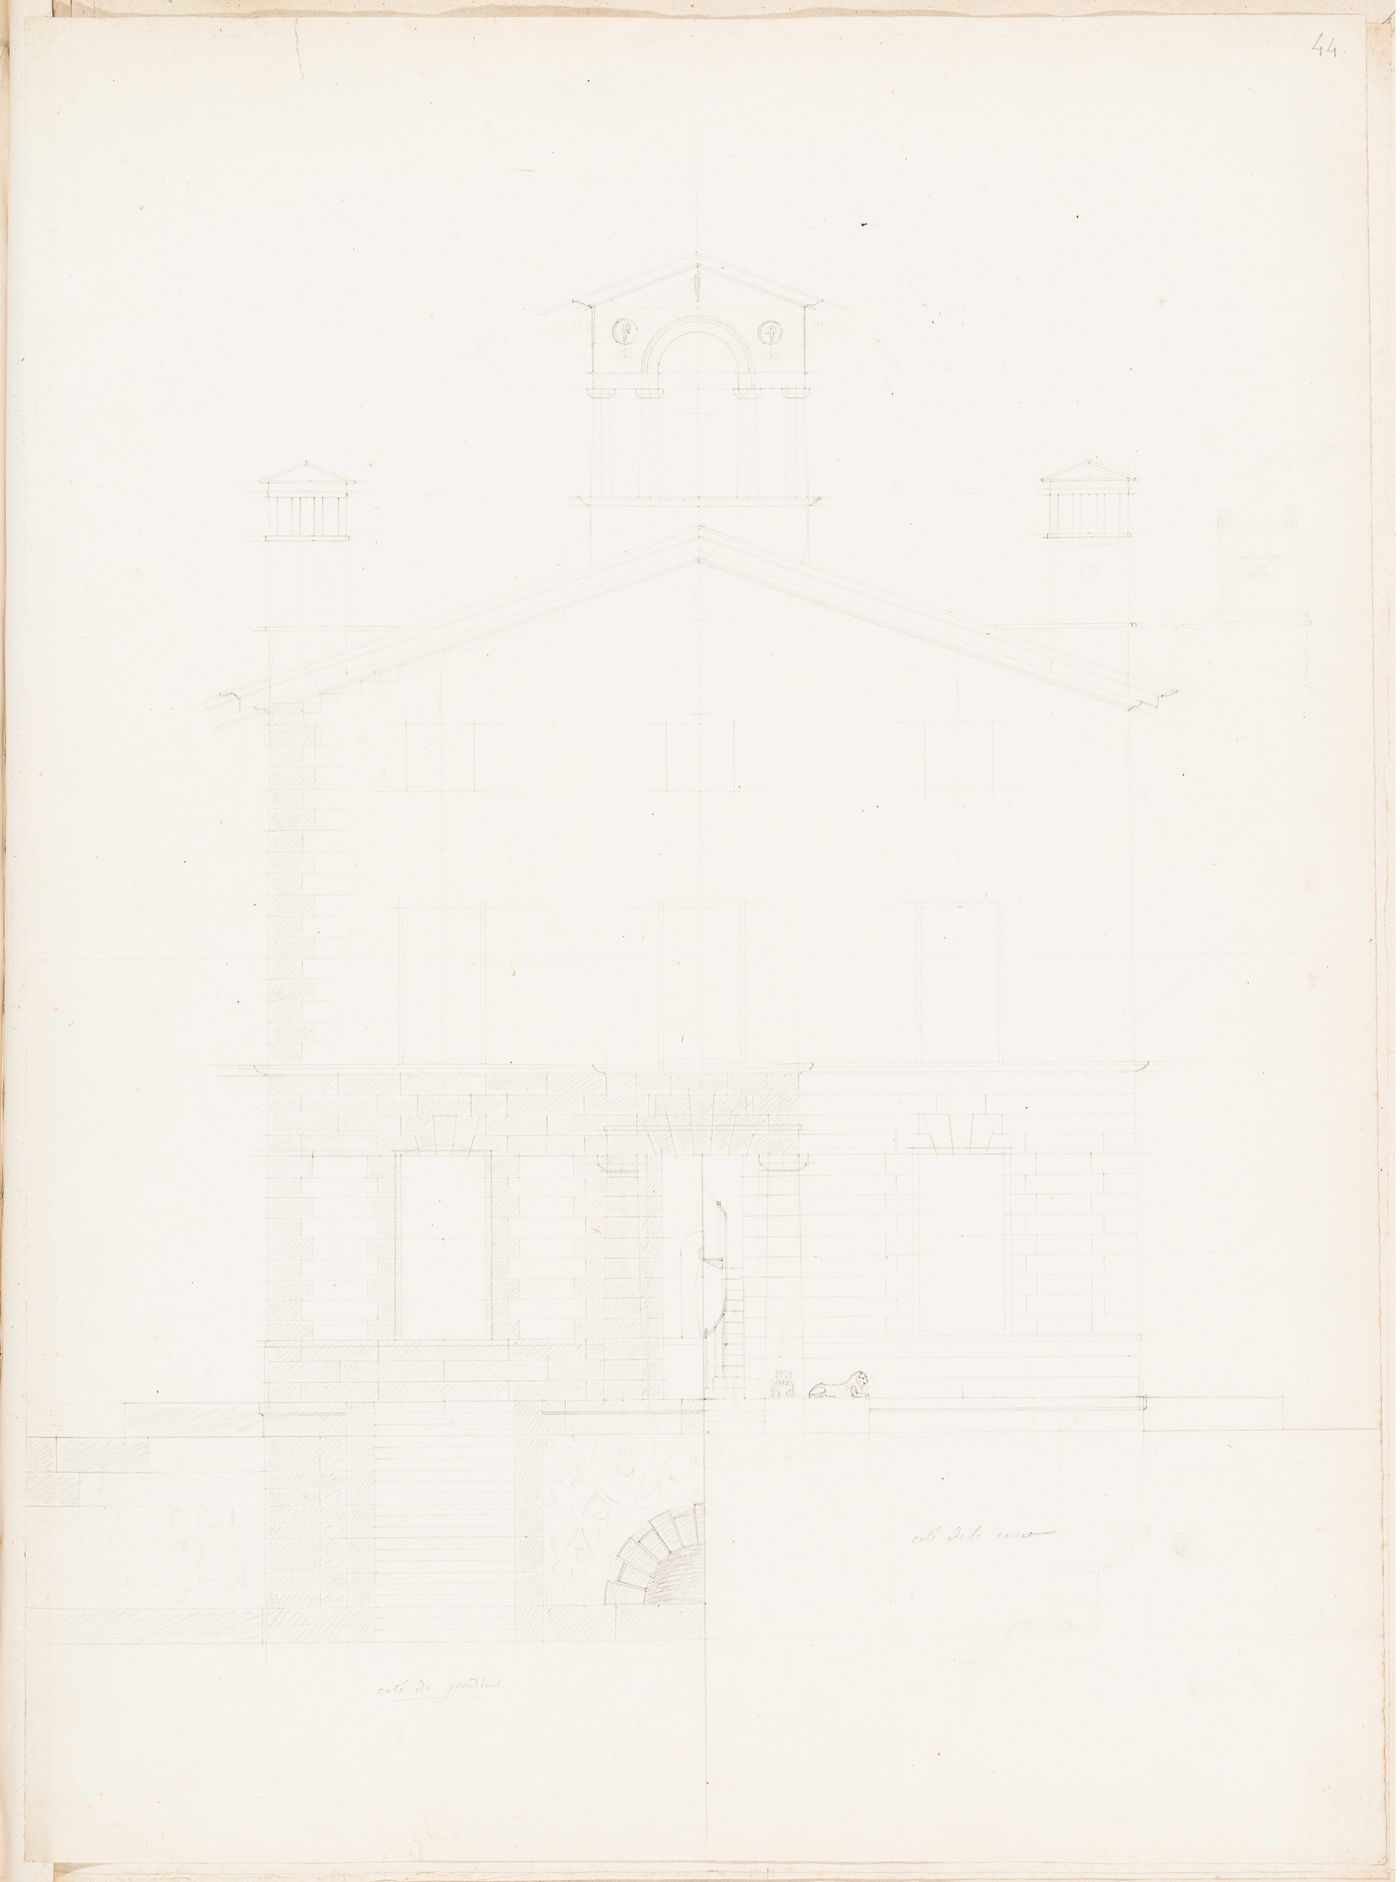 Half elevations for the garden and courtyard façades for a country house